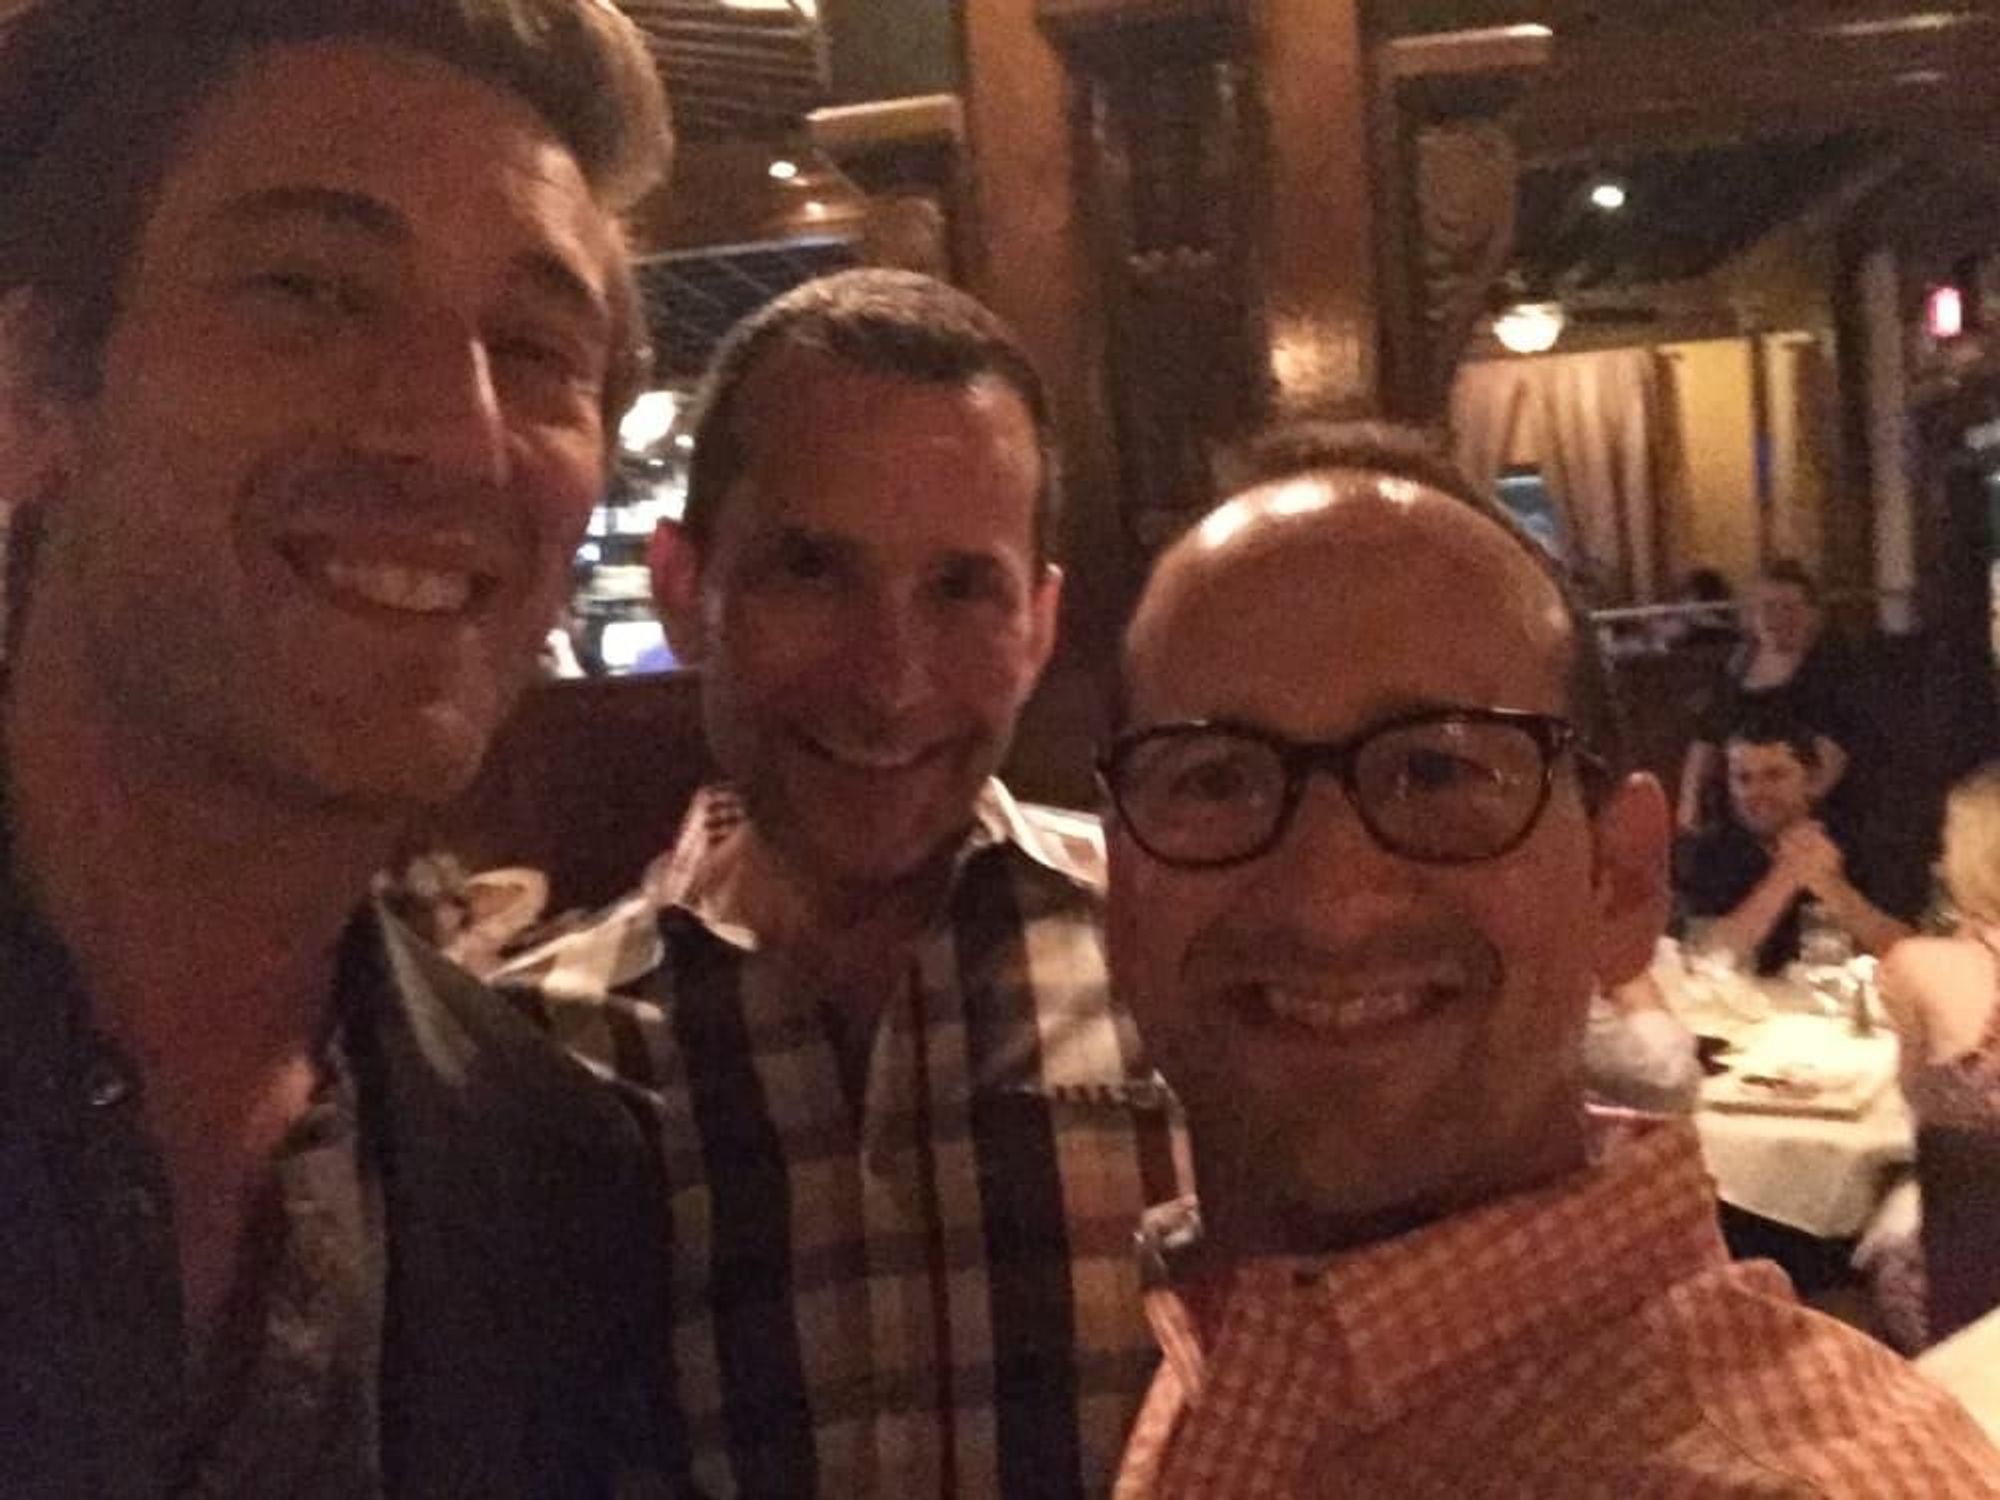 David Muir poses with Houston fans Dave Riddle and Kevin Begnaud at Armandos